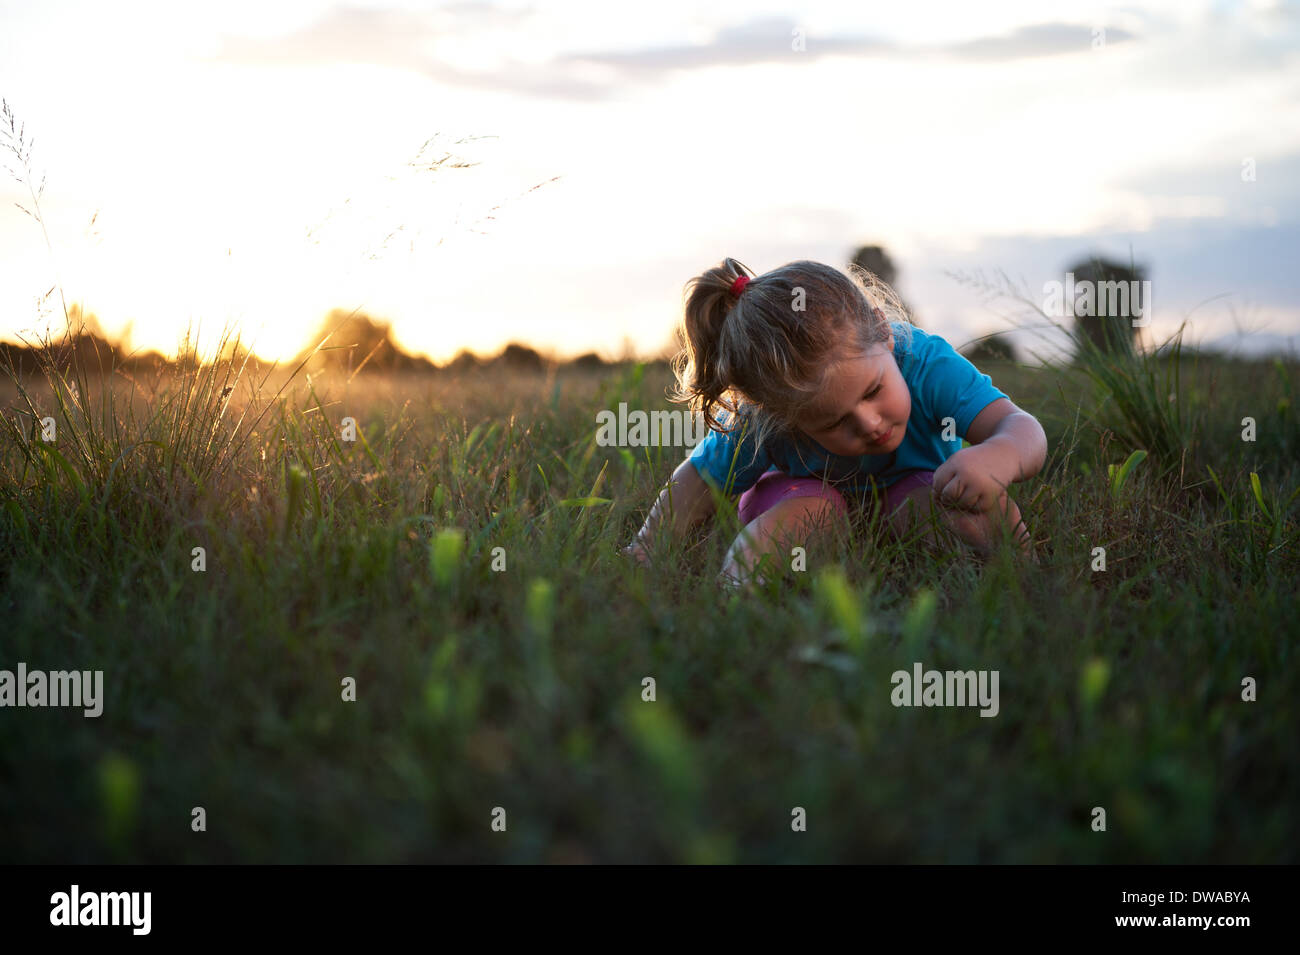 Young toddler sitting playfully on the grass during sunset. Stock Photo